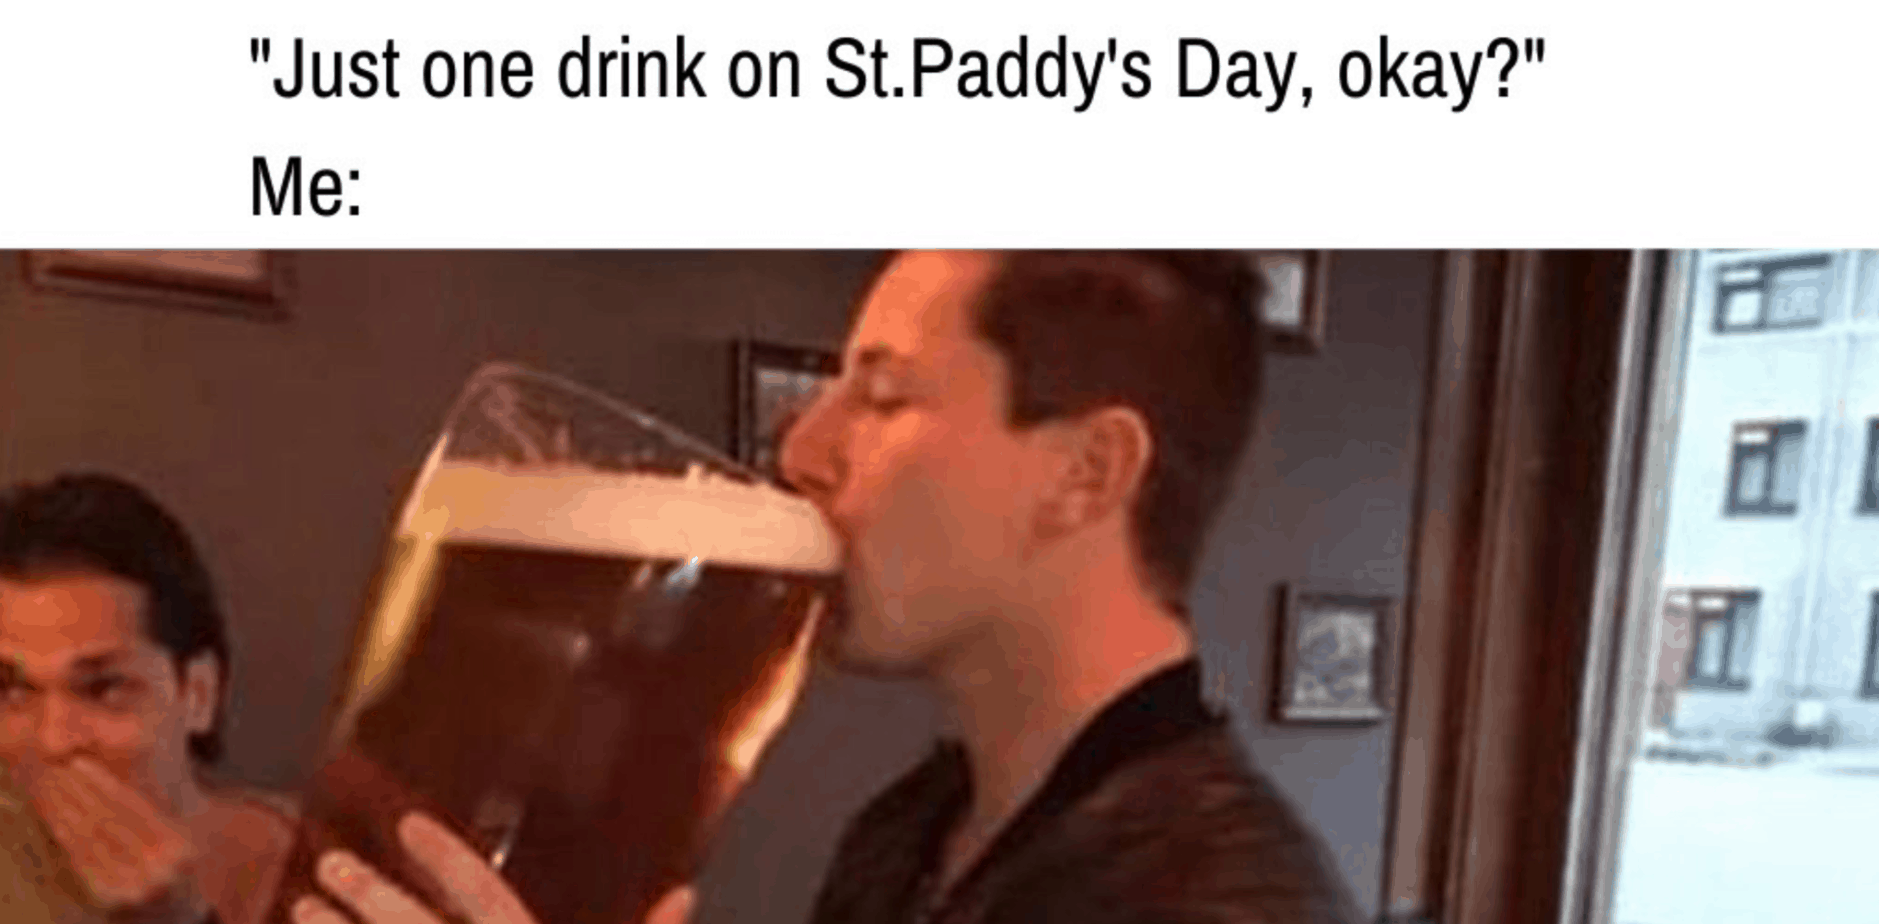 Just one drink on St Patricks dayy